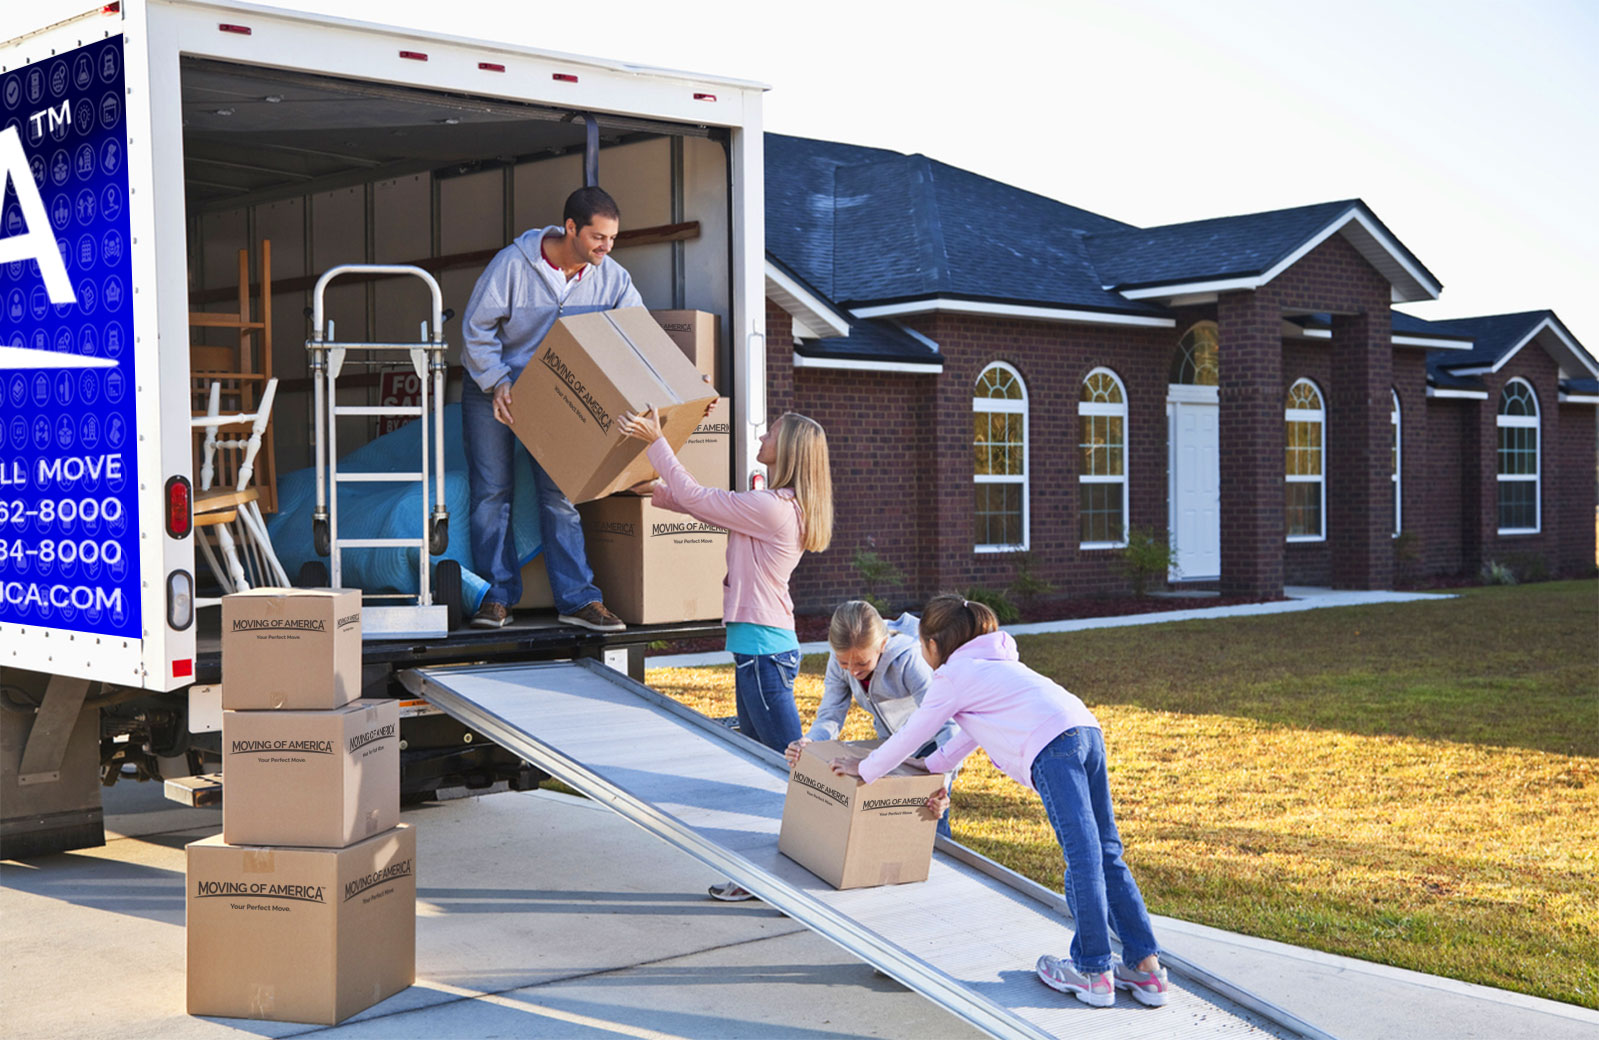 Choosing Moving of America’s Morris County Movers for your move in Morris County, NJ